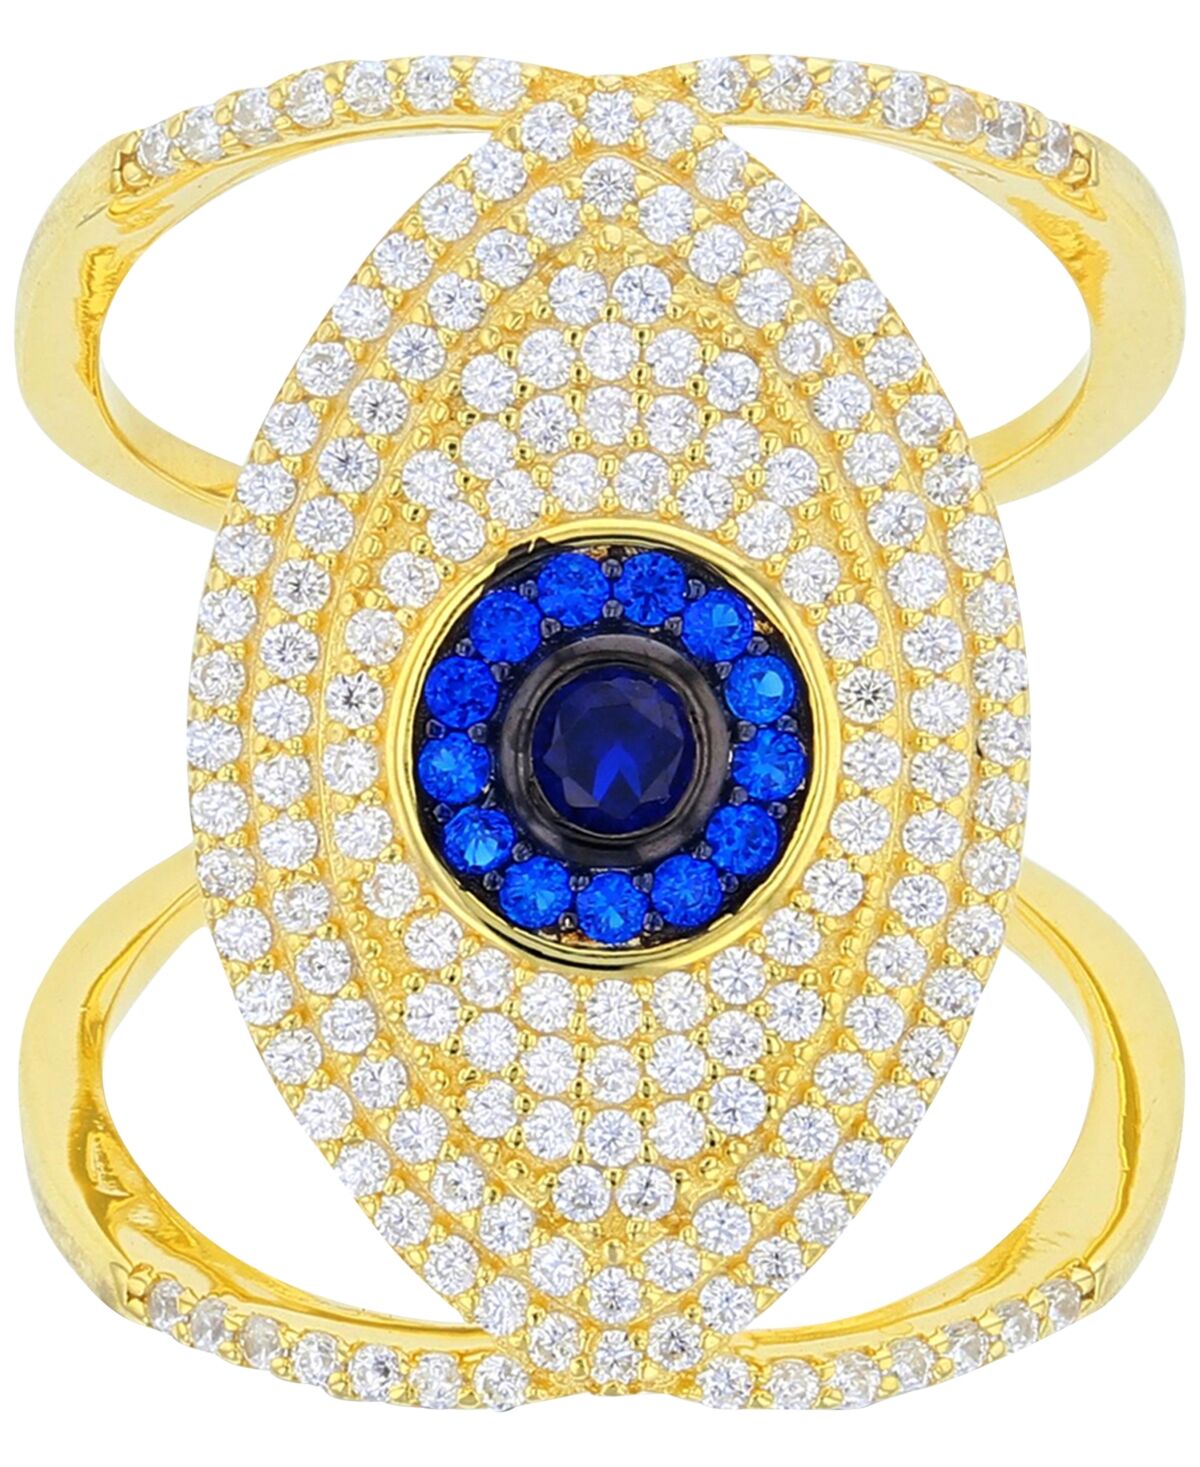 Macy's Cubic Zirconia Lab-Created Blue Spinel (1/3 ct. t.w.) Evil Eye Ring in 14k Gold-Plated Sterling Silver - Blue Spinel